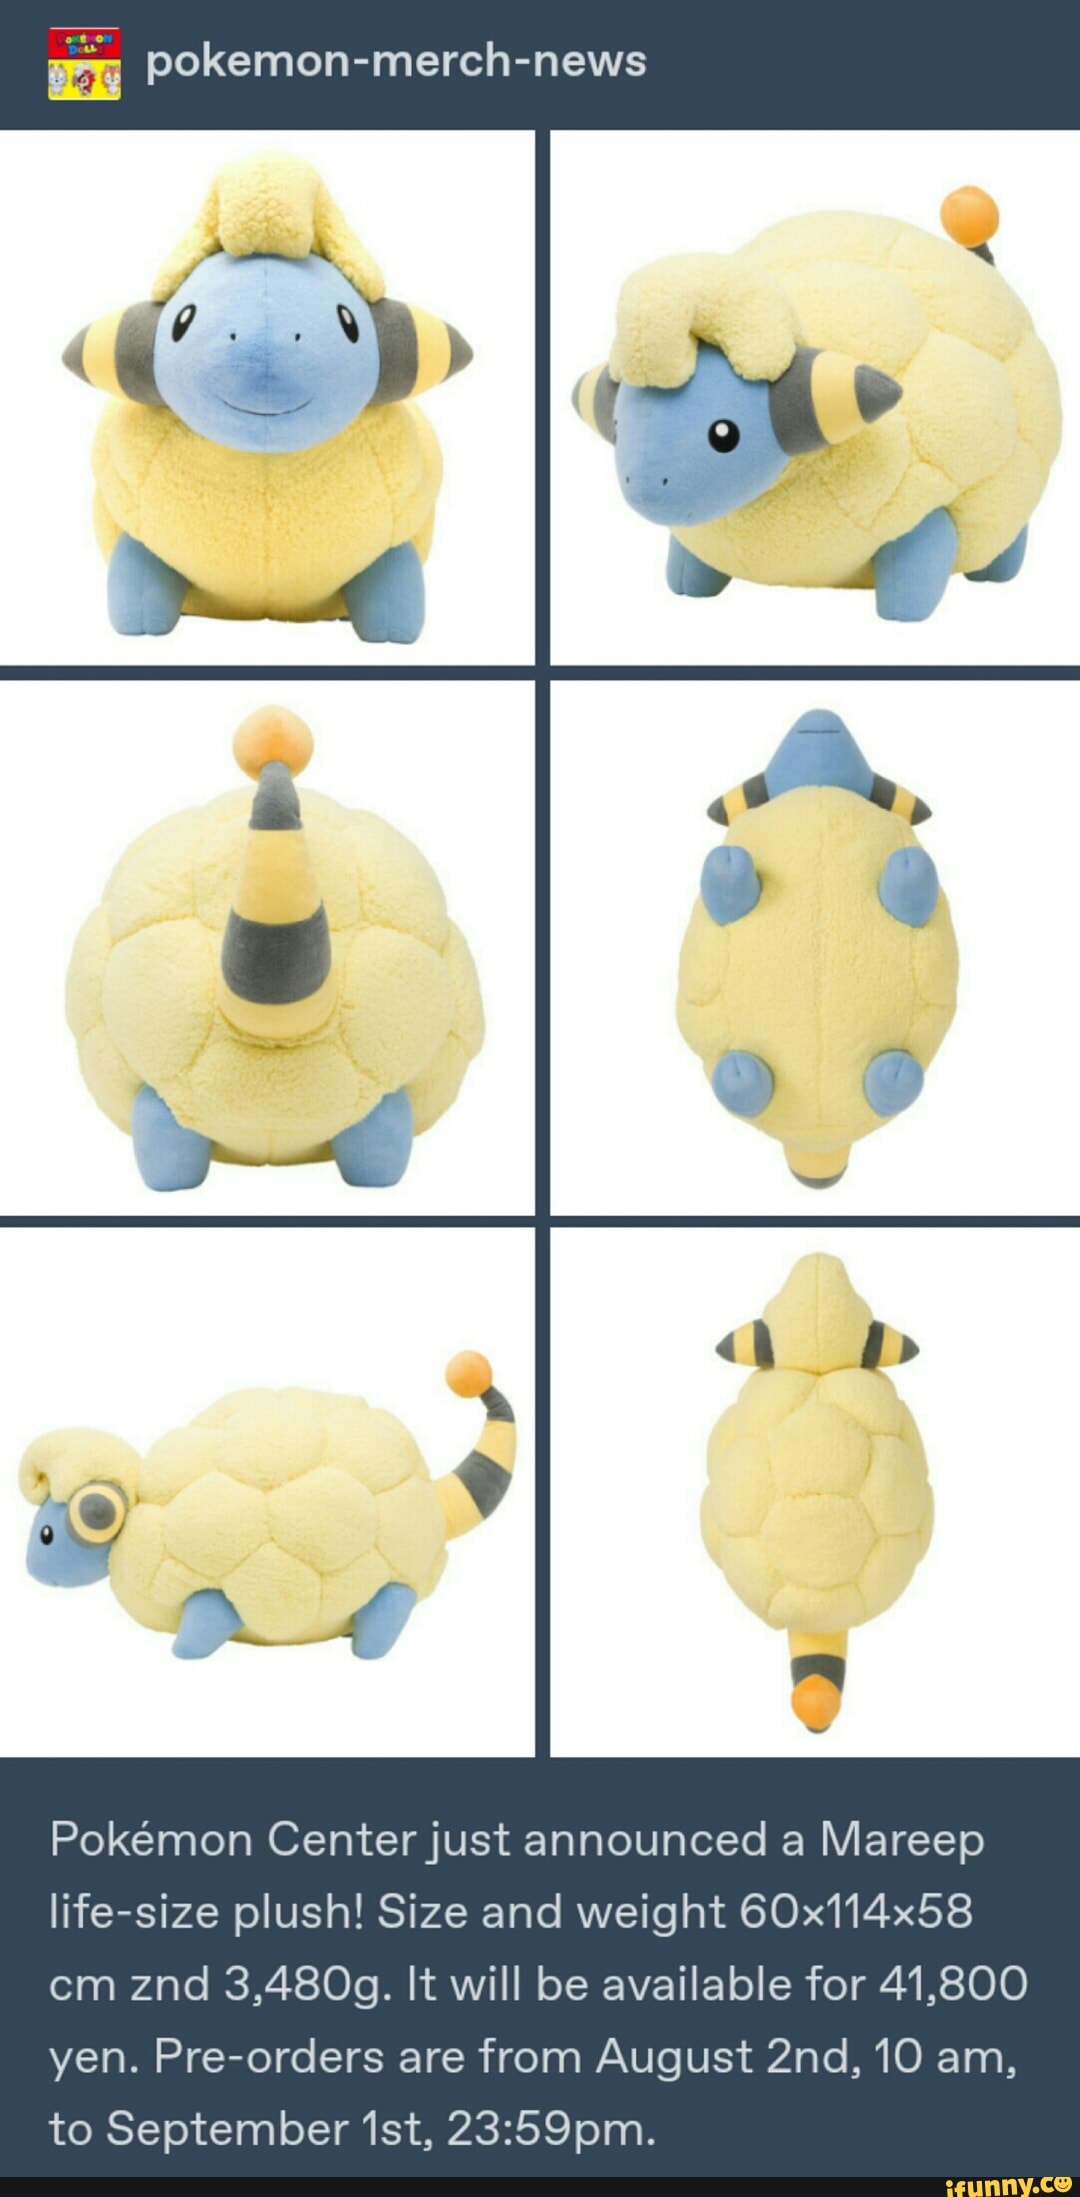 Pokemon Merch News Pokemon Centerjust Announced A Mareep Life Size Plush Size And Weight 60x114x58 Cm Znd 3 4809 It Will Be Available For 41 800 Yen Pre Orders Are From August 2nd 10 Am To September1st 23 59pm